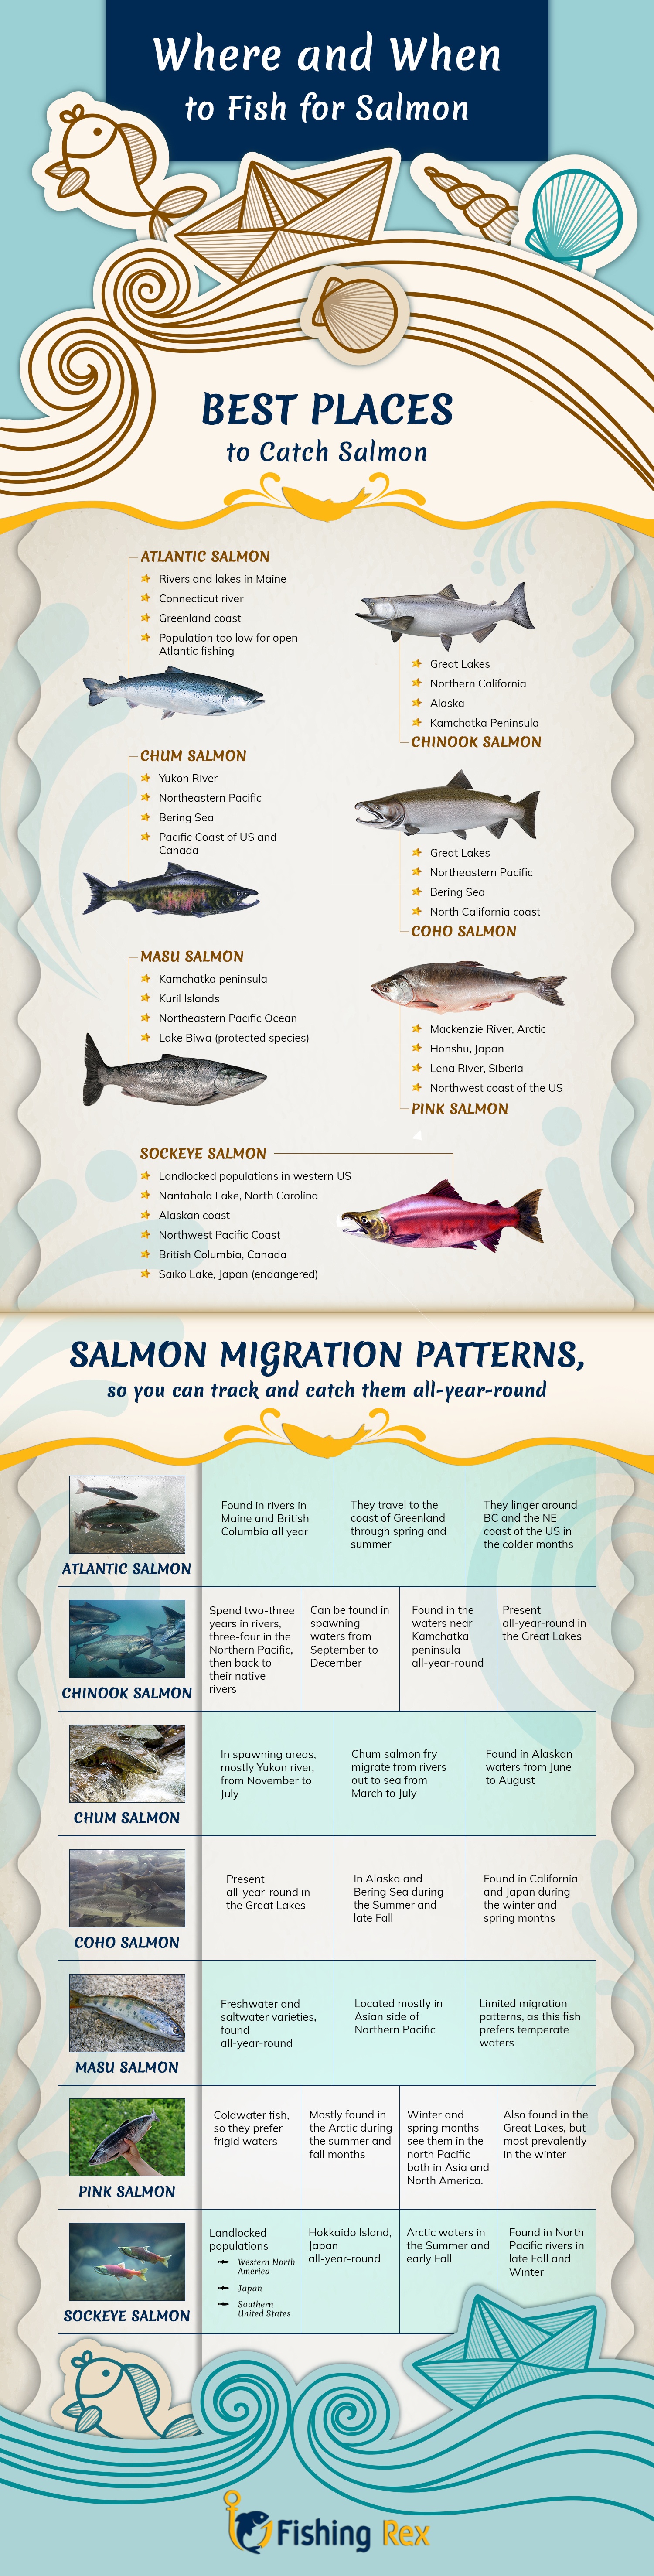 Where and When to Fish for Salmon